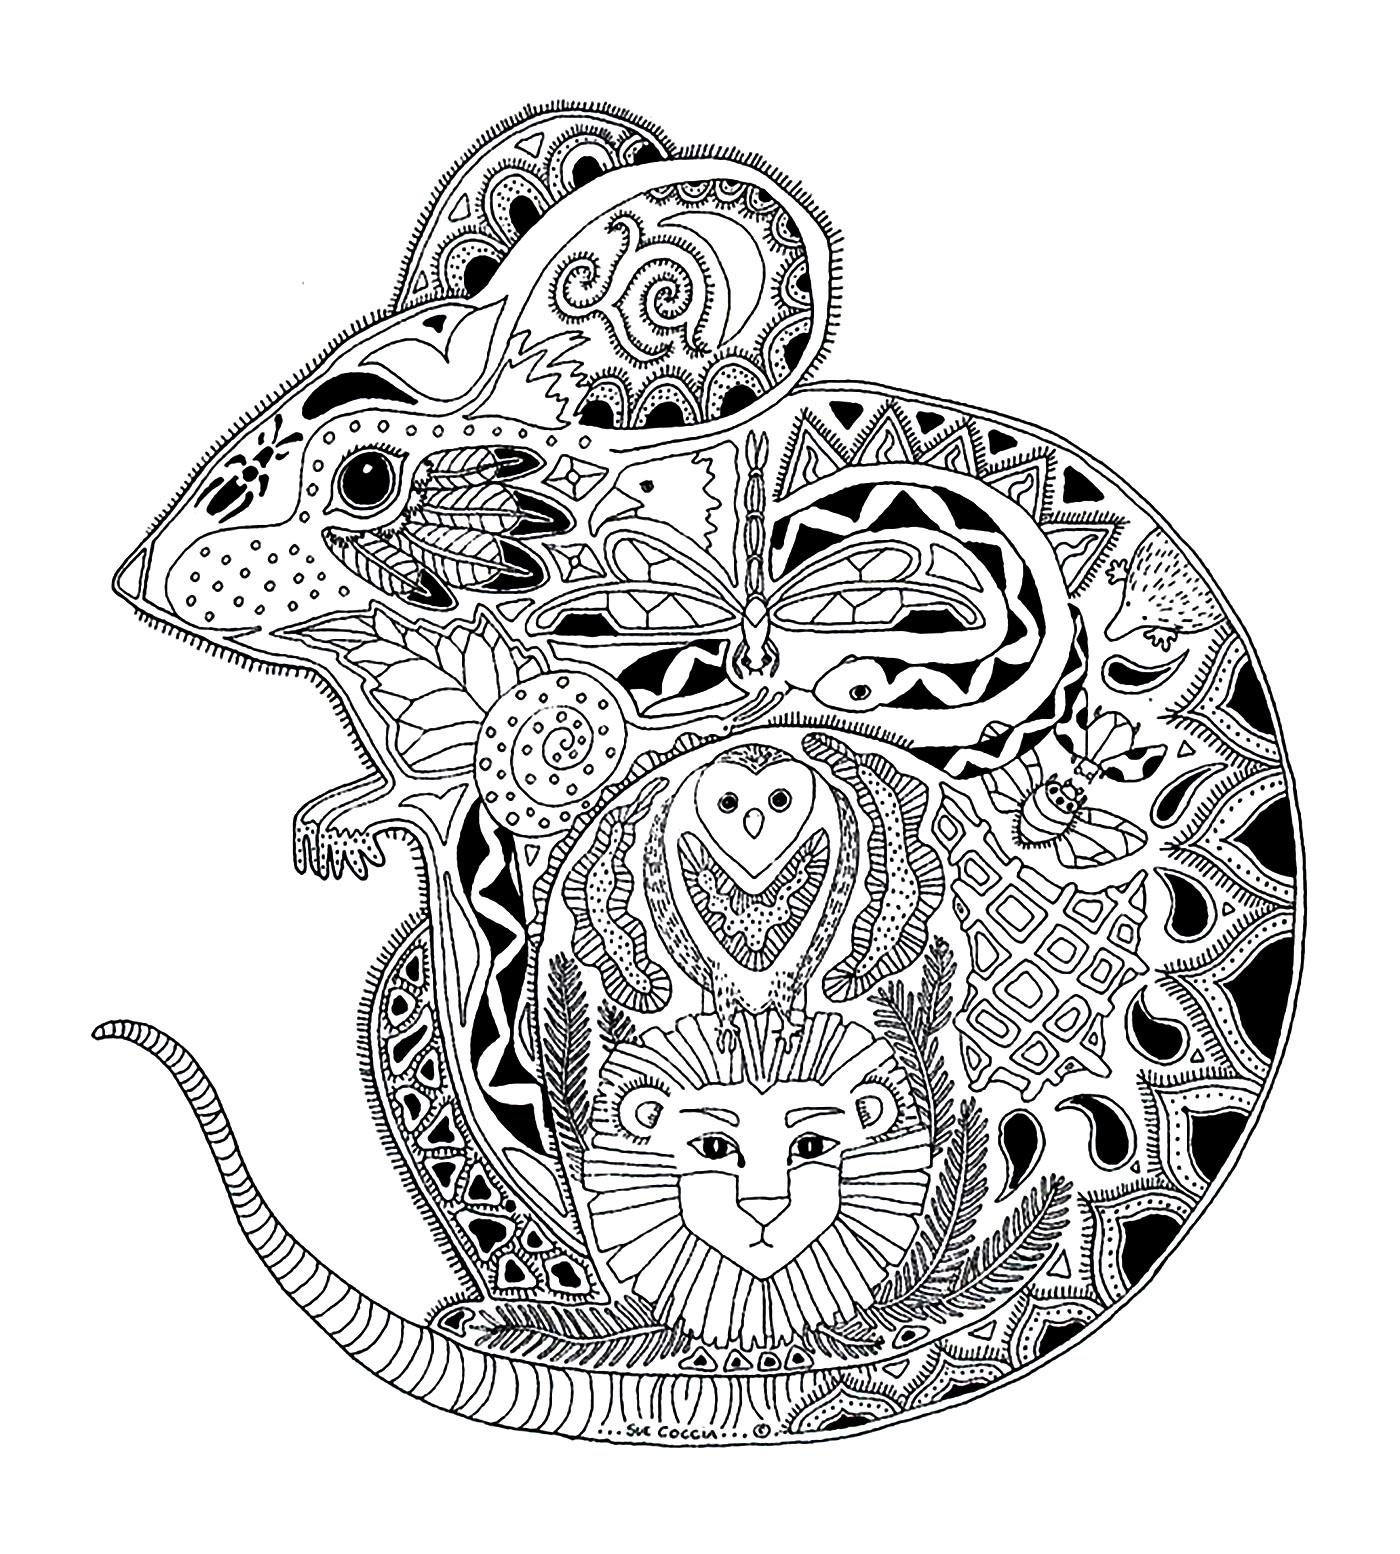 Drawing of a mouse, with interesting details